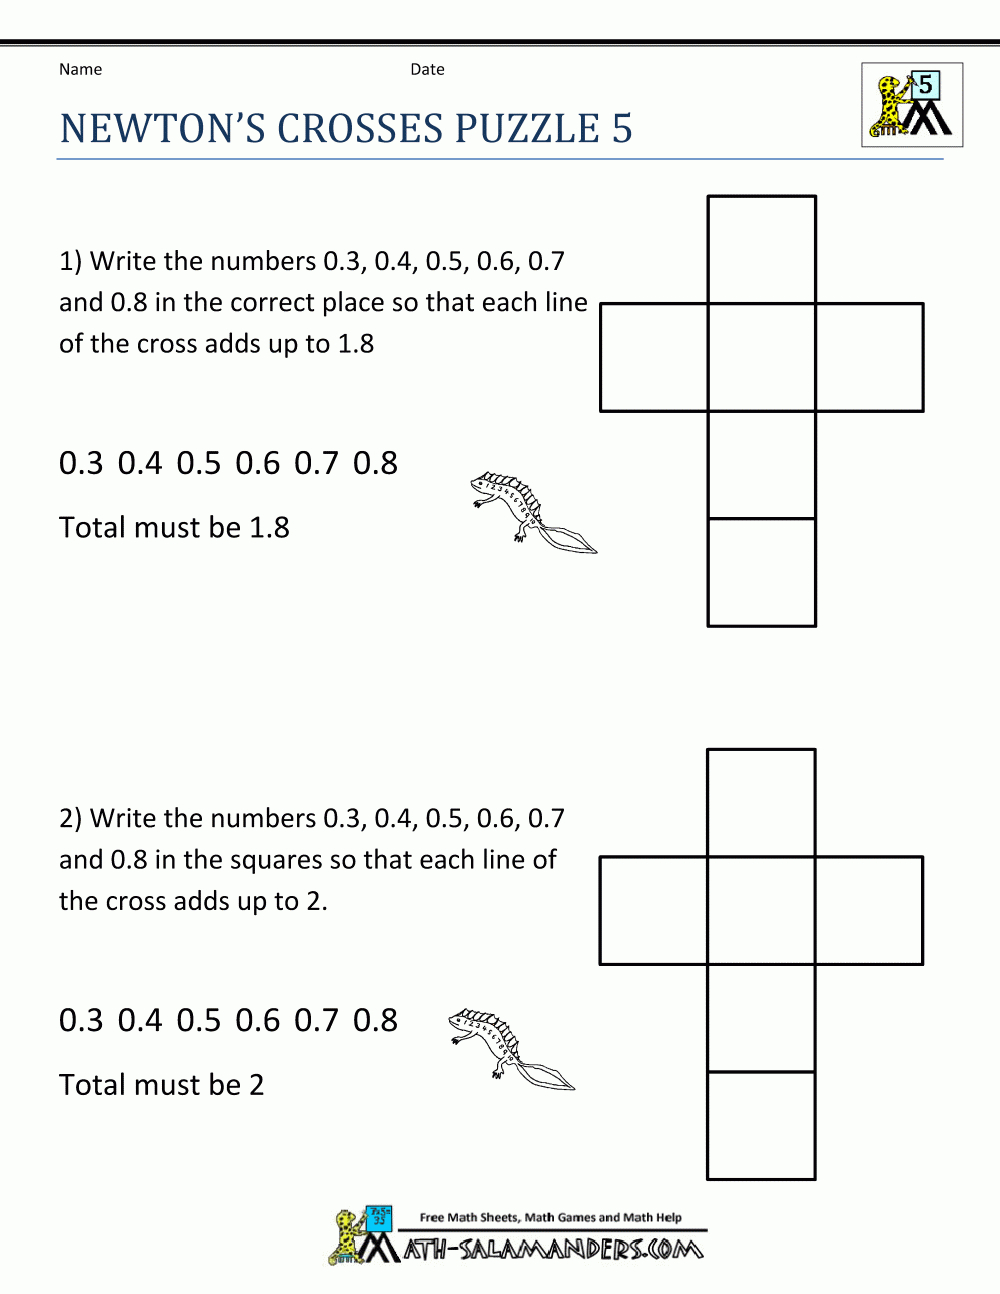 Fun Math Worksheets Newtons Crosses Puzzle 5 | Activities For Kids - Puzzle Worksheet Year 4